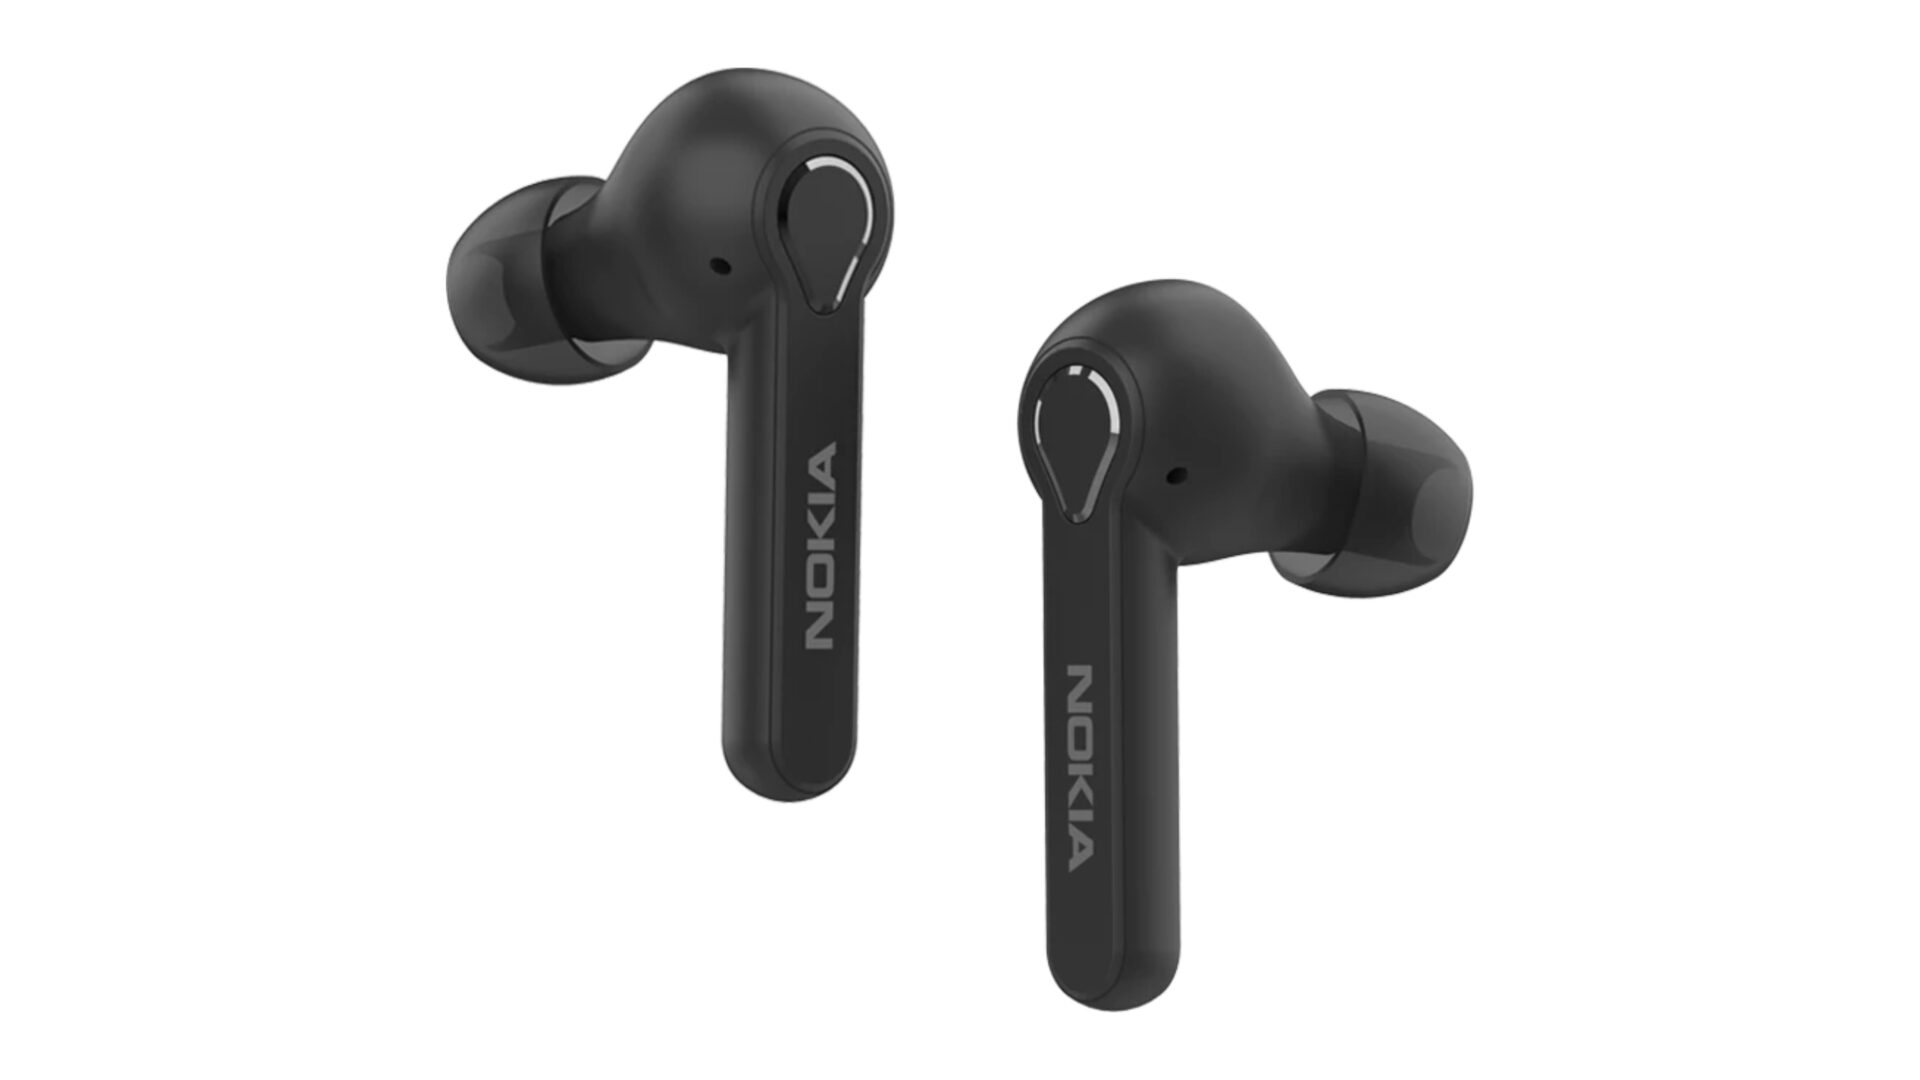 Nokia Lite Earbuds (BH-205) launched with 36-hour battery life - Gizmochina